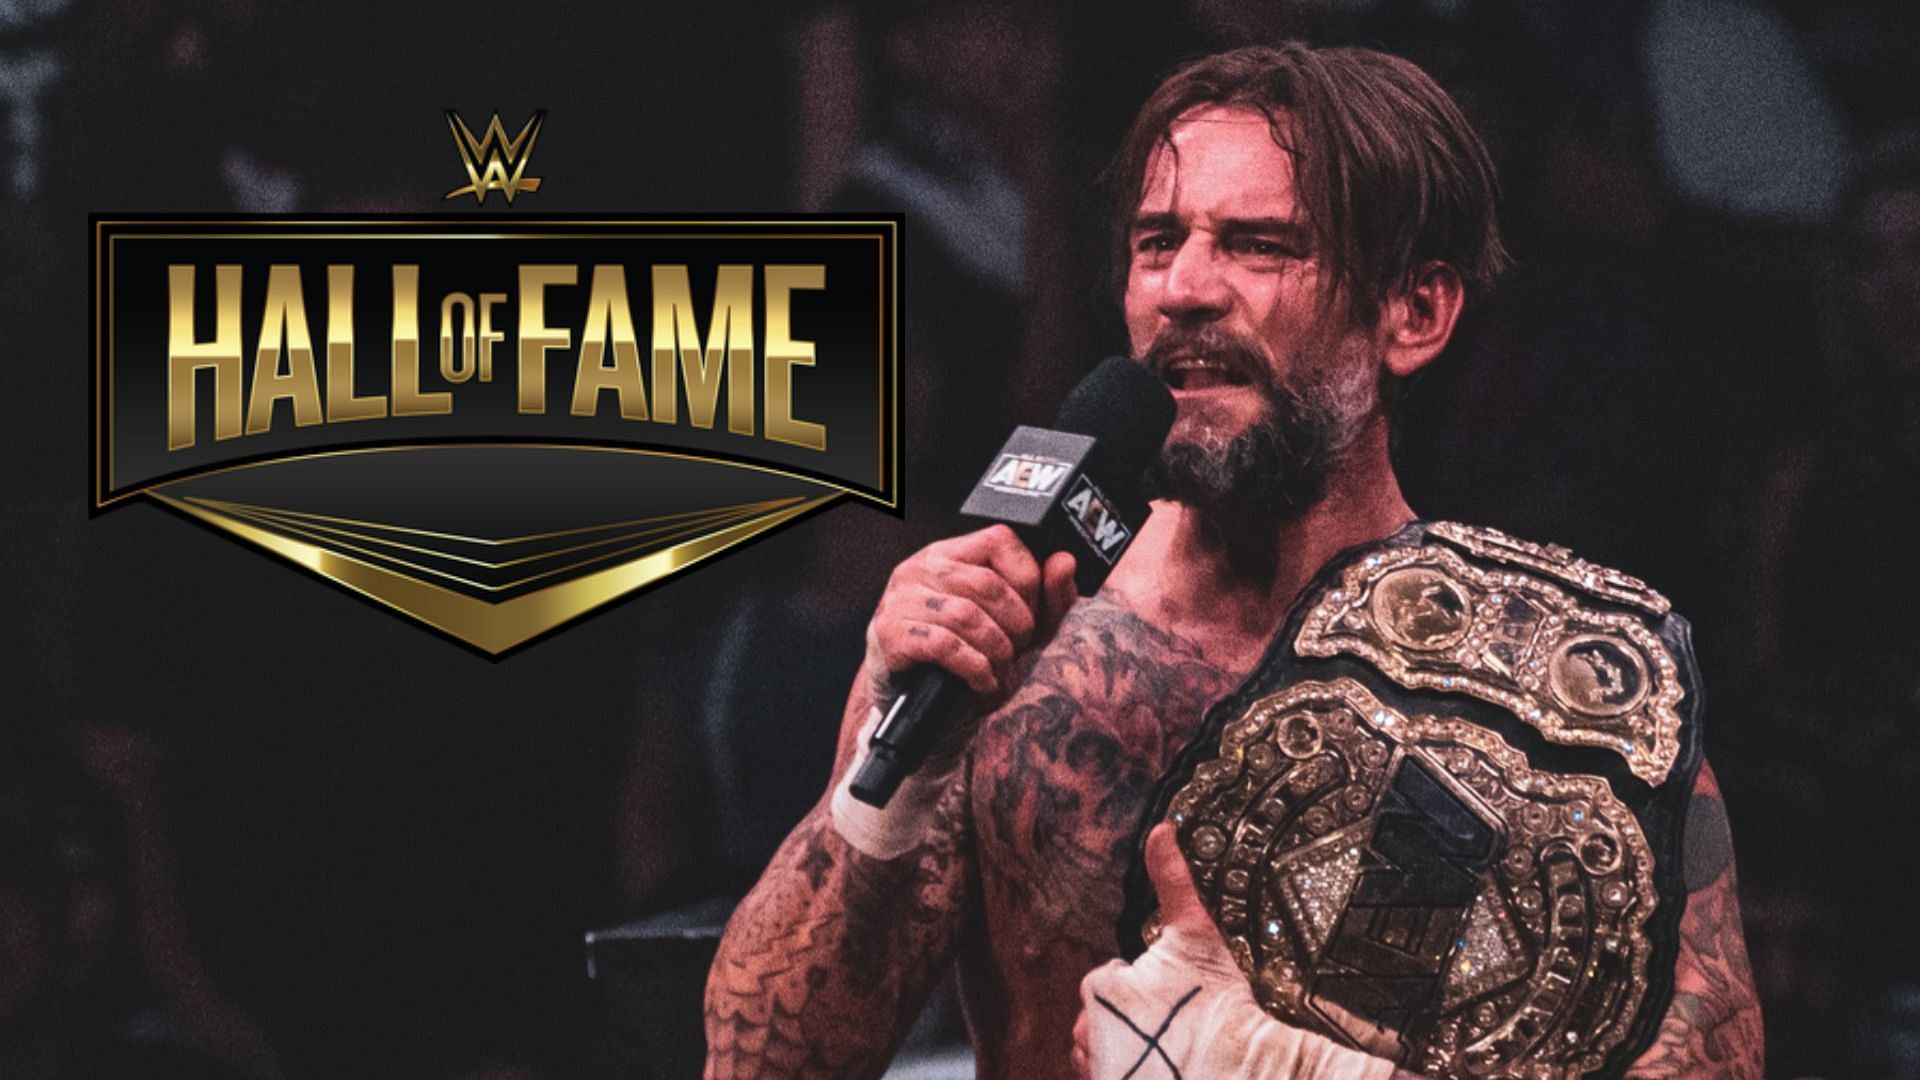 Which WWE Hall of Famer would love to face CM Punk?